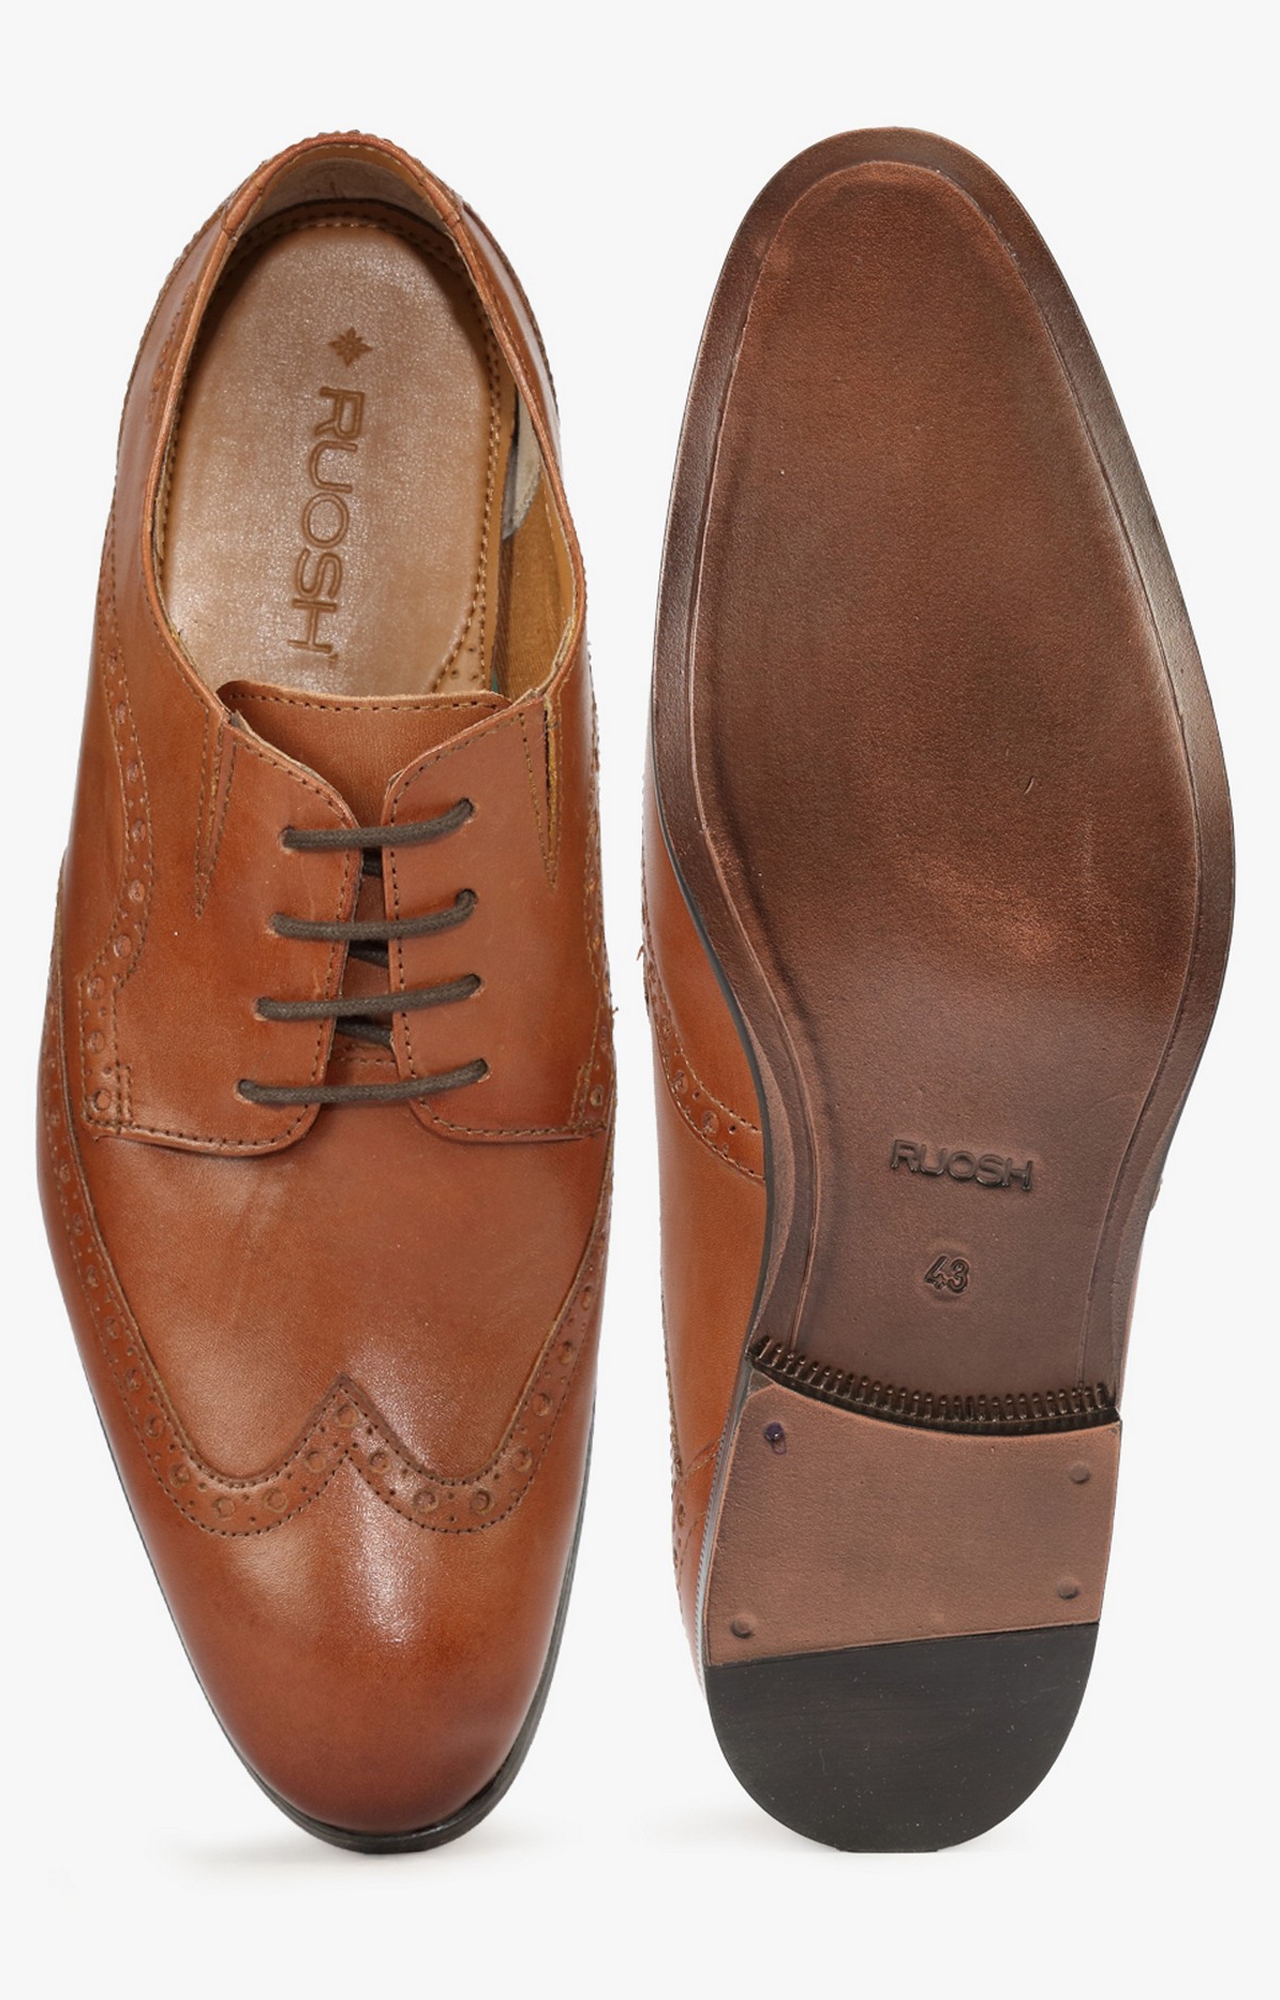 Ruosh | Tan Derby Shoes 4